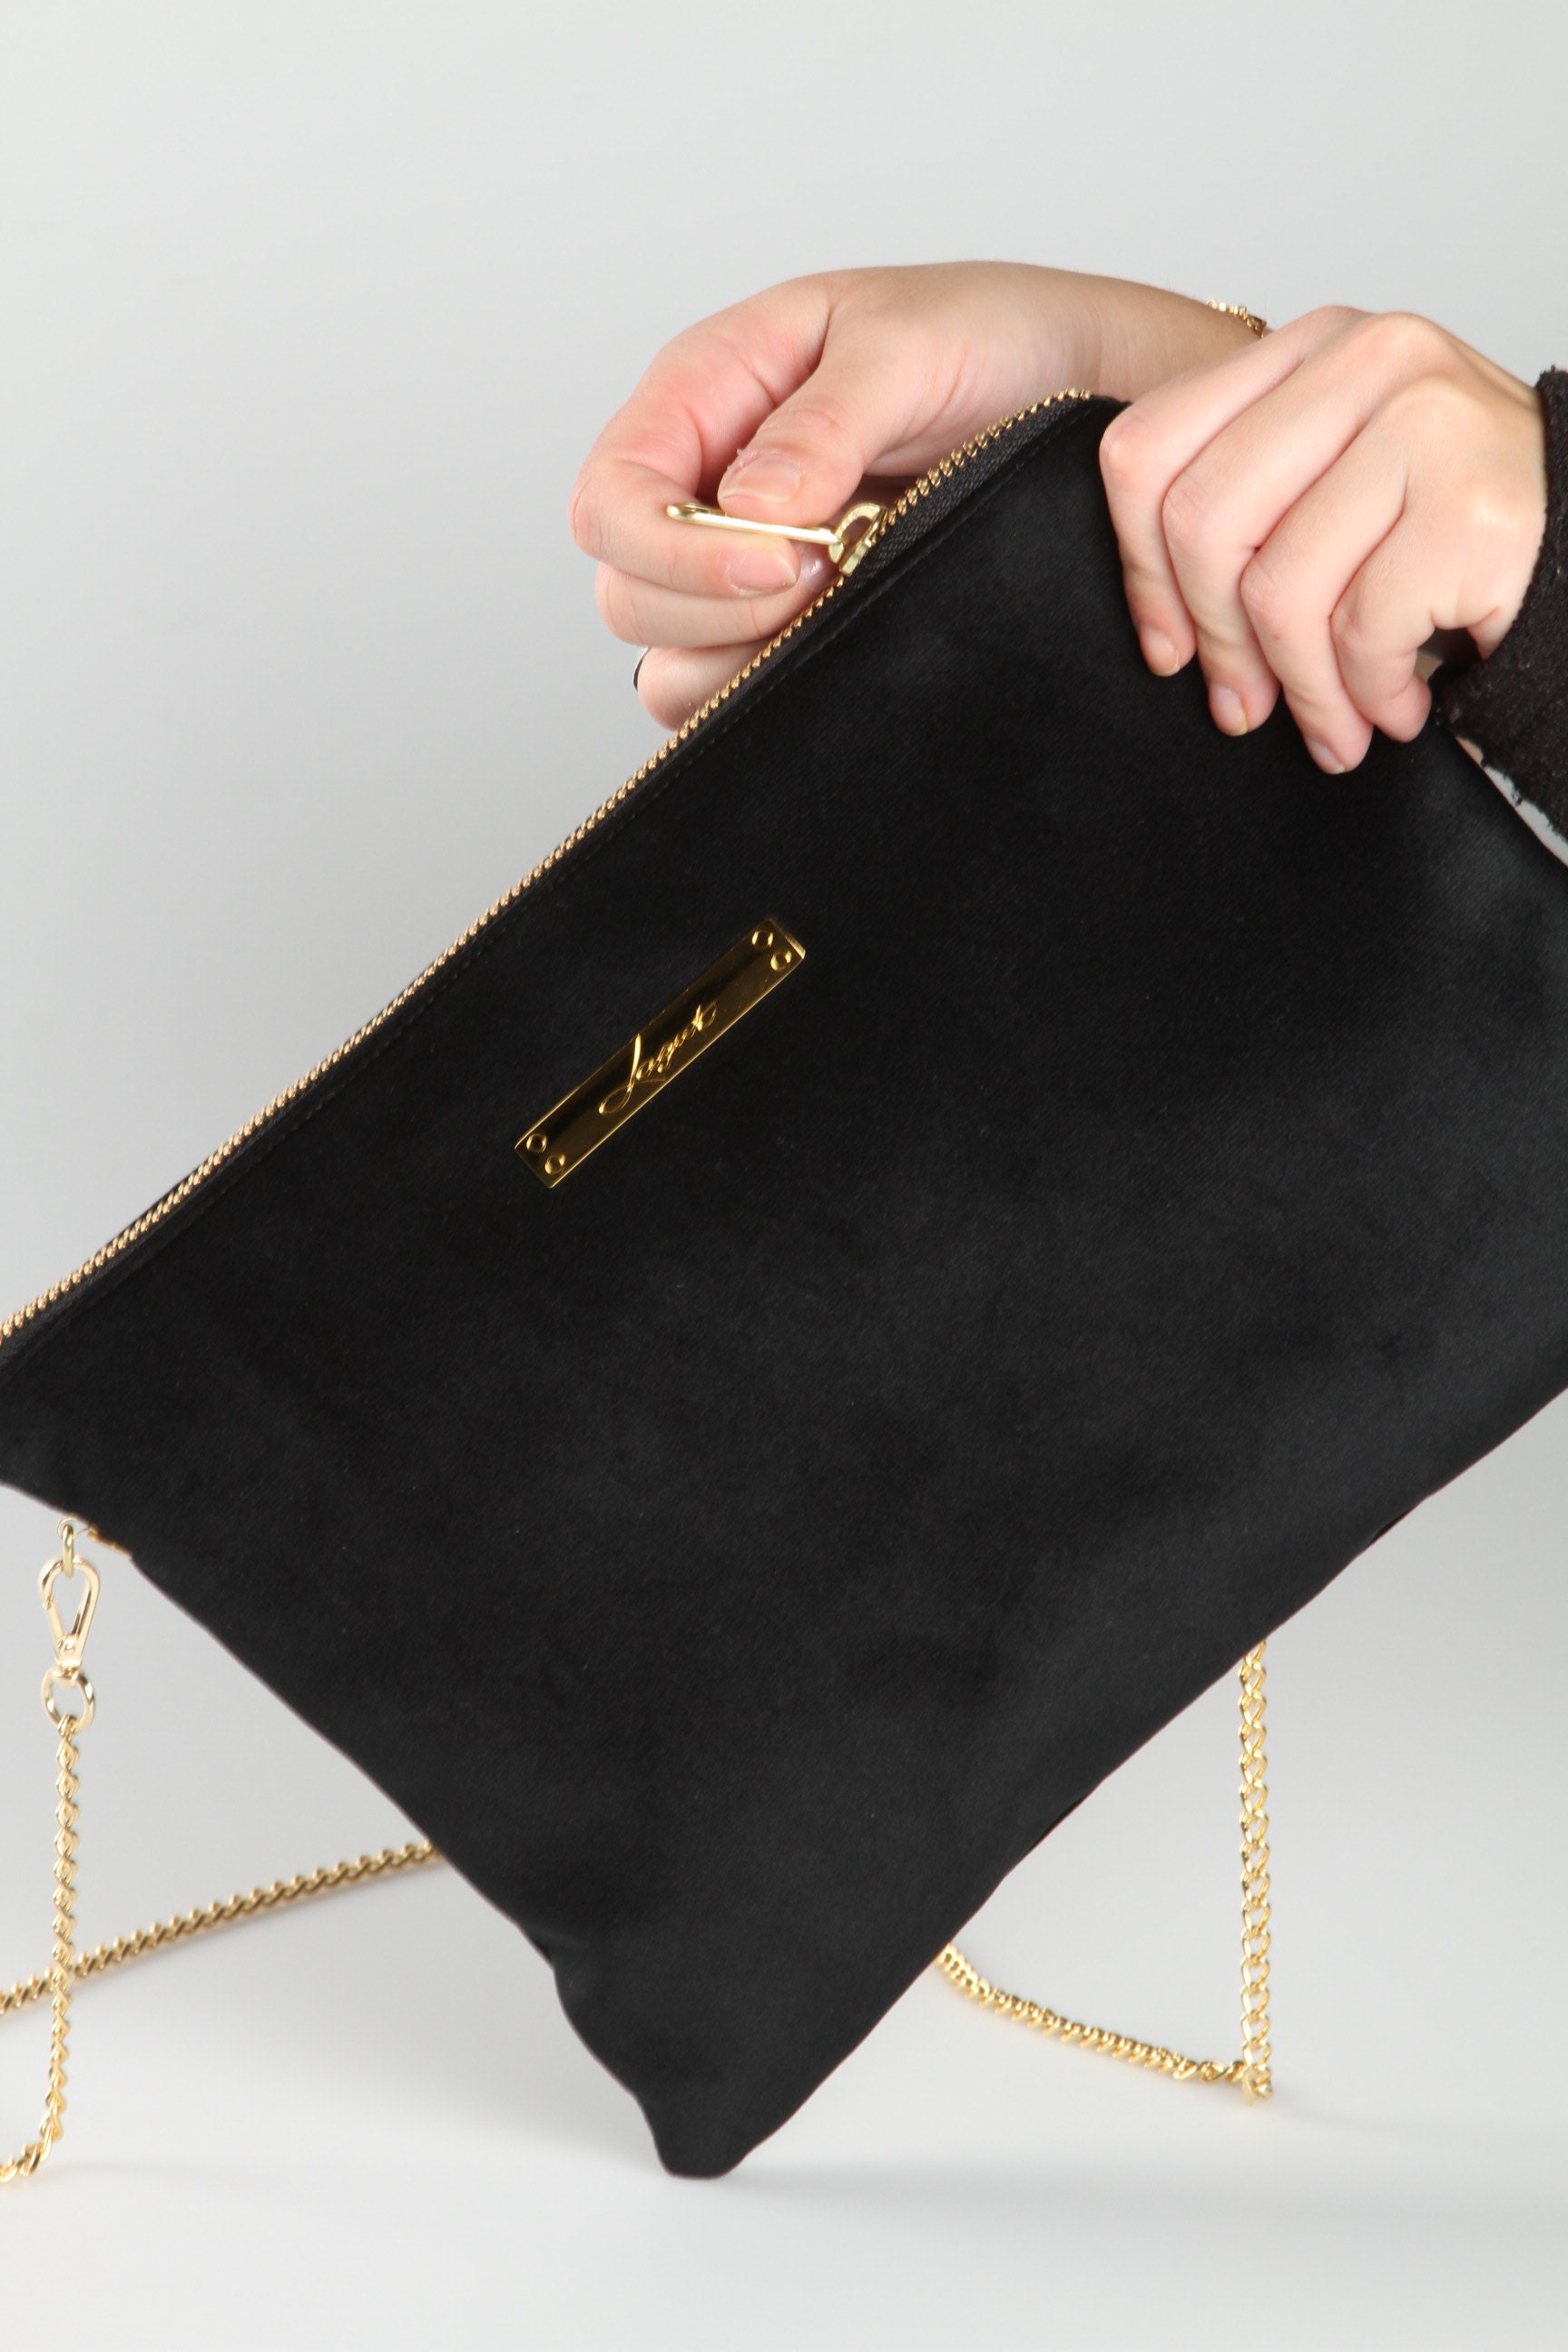 Black Suede Bag Suede Crossbody Bag With Gold Chain Women - Etsy